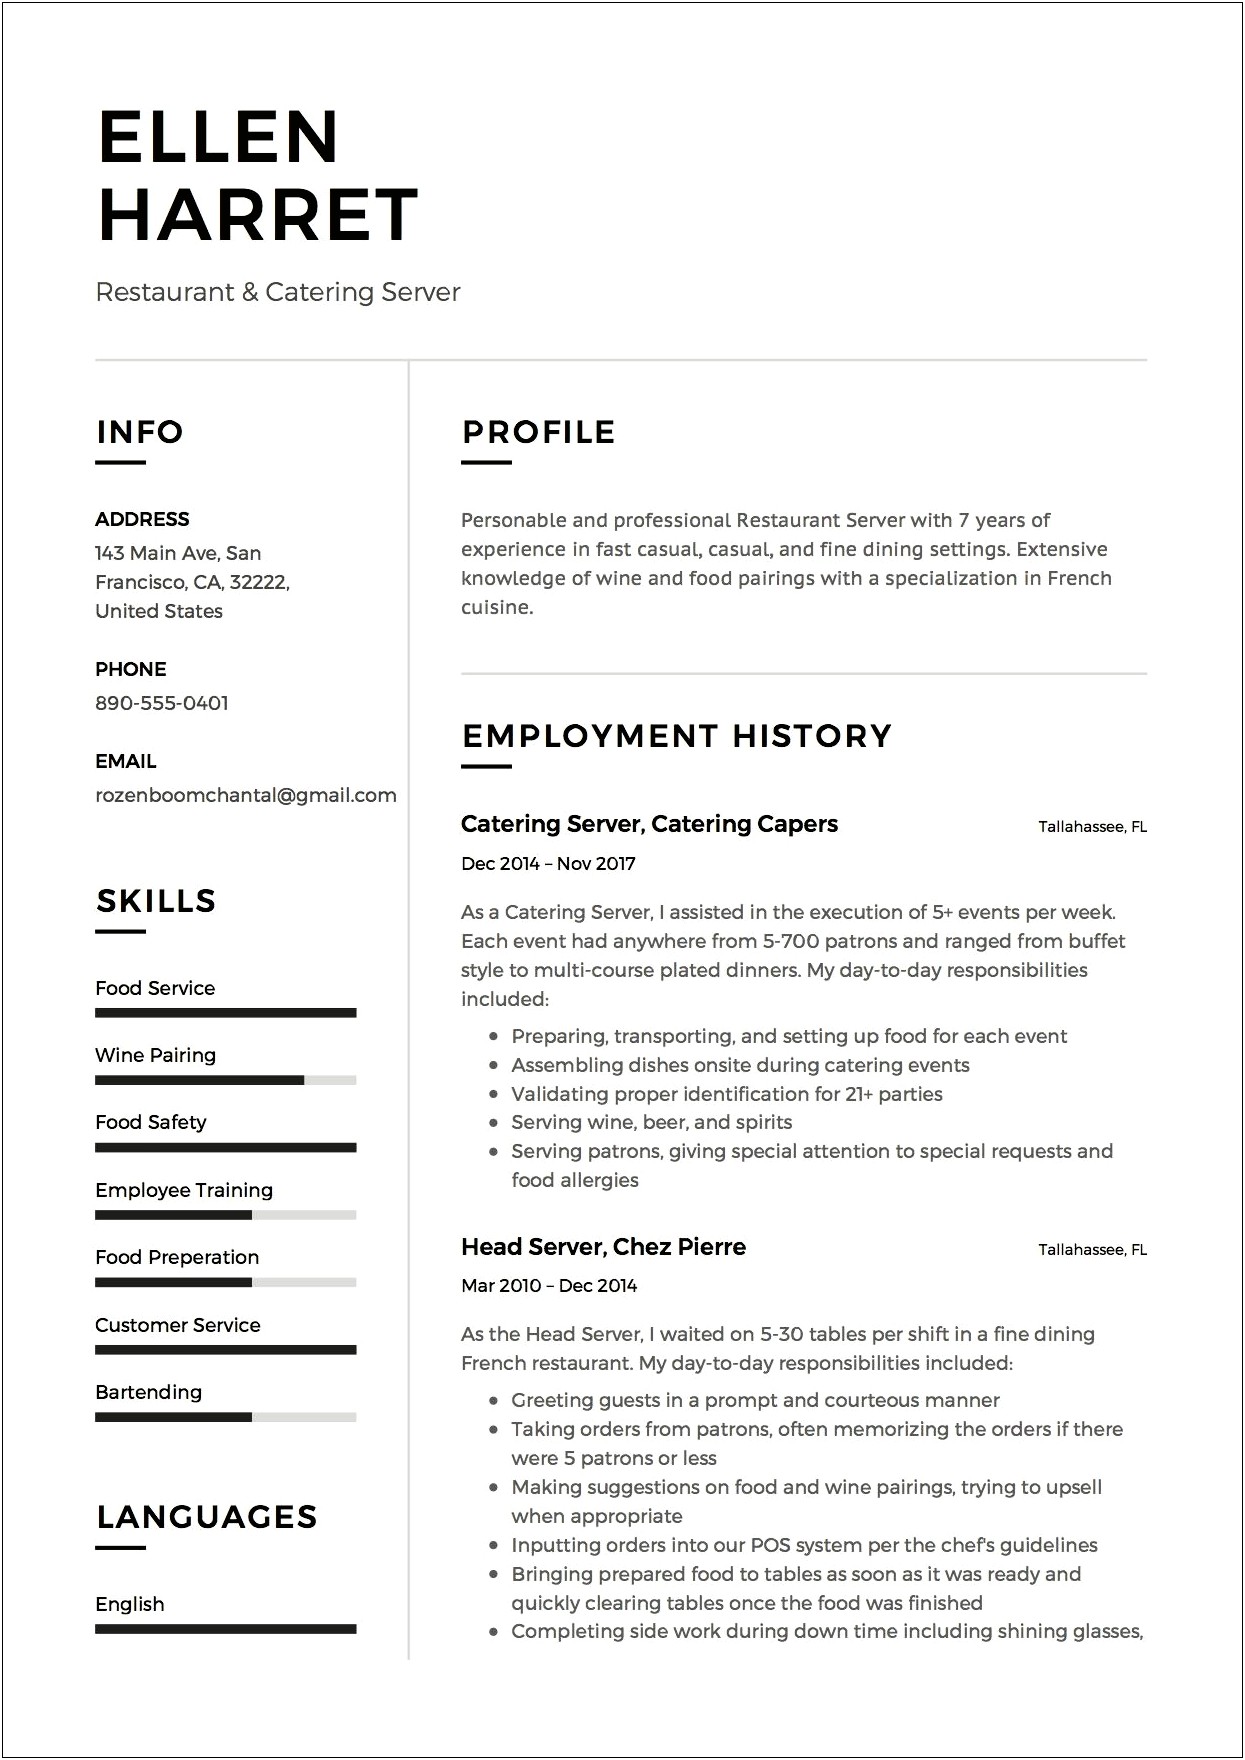 Job Responsibilities Of A Server For A Resume